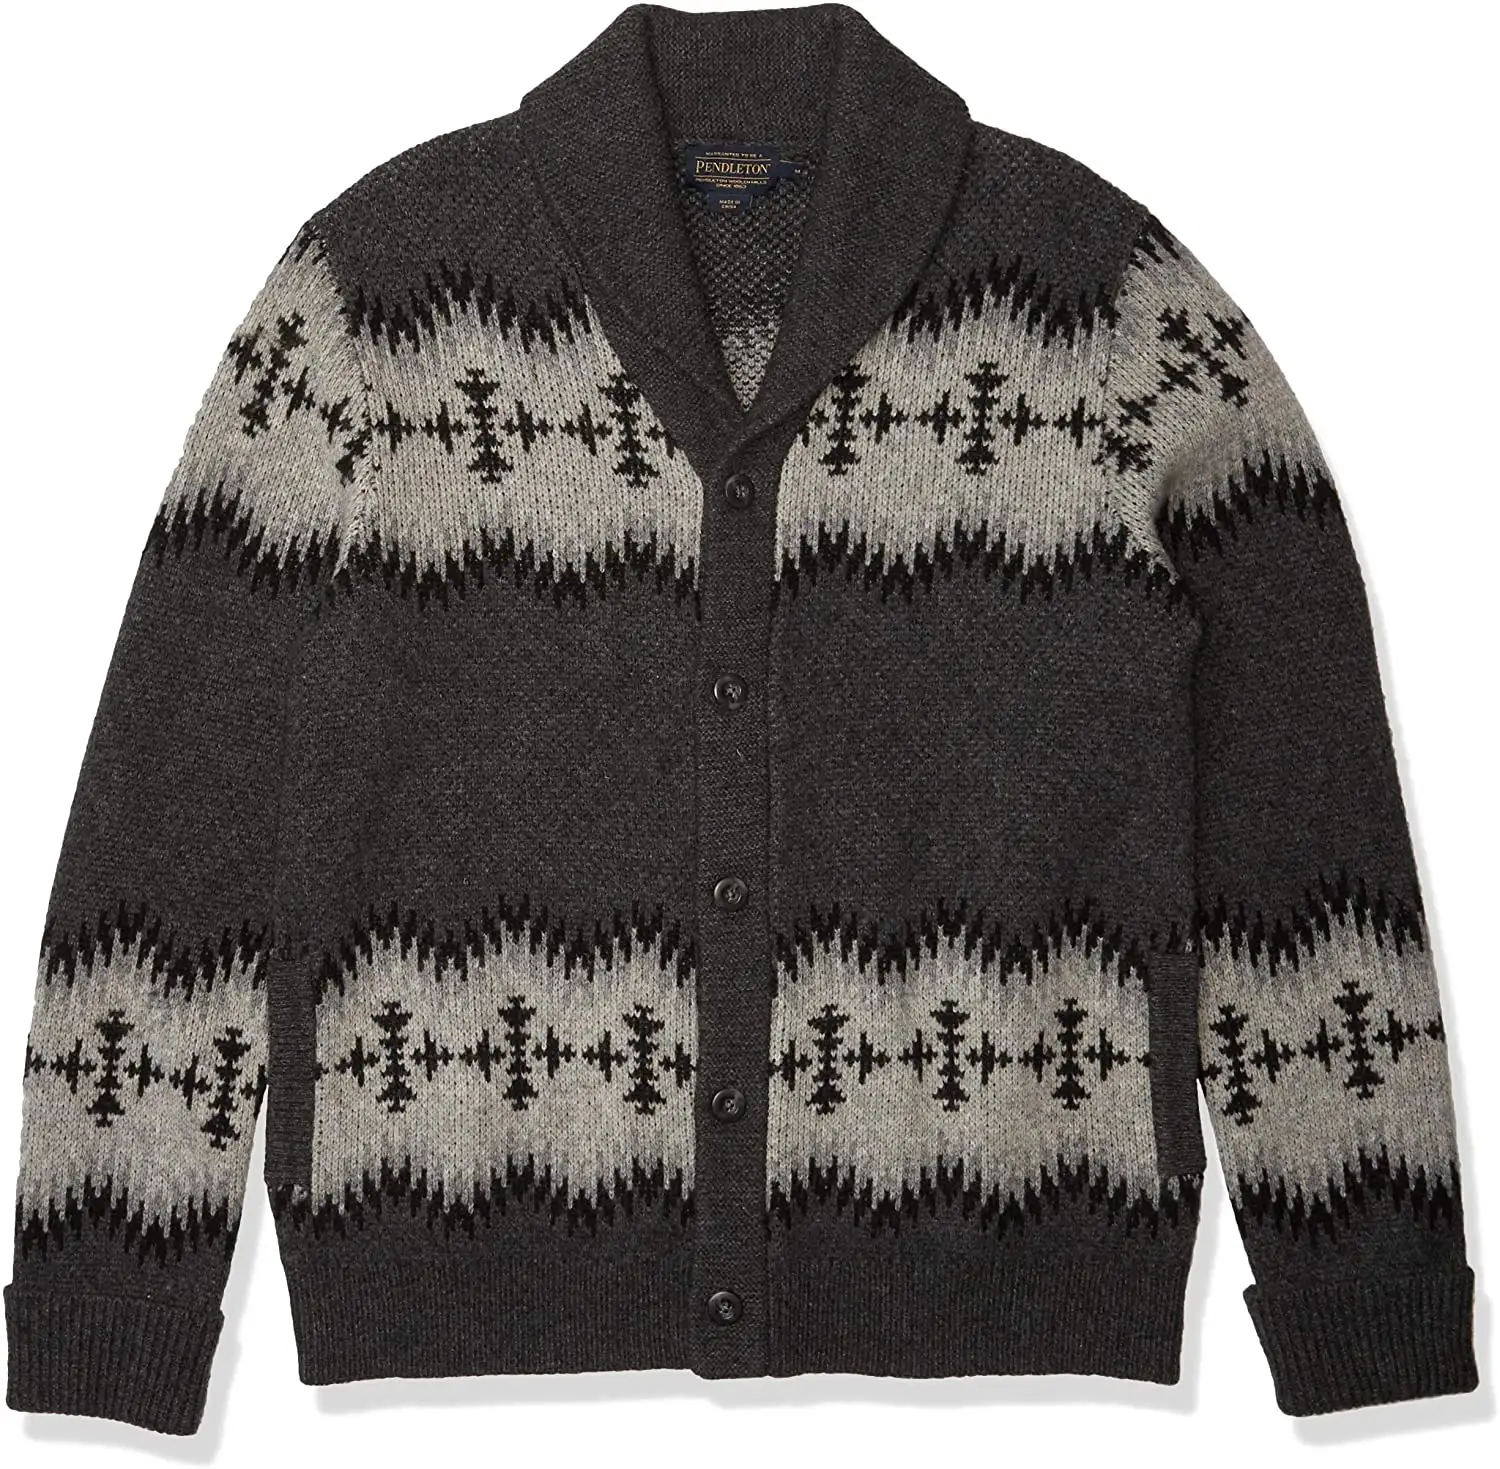 Hot Sale Fashion Jacquard V-neck Ribbed Gray Vintage Button Knitted Men's Cardigan Sweater